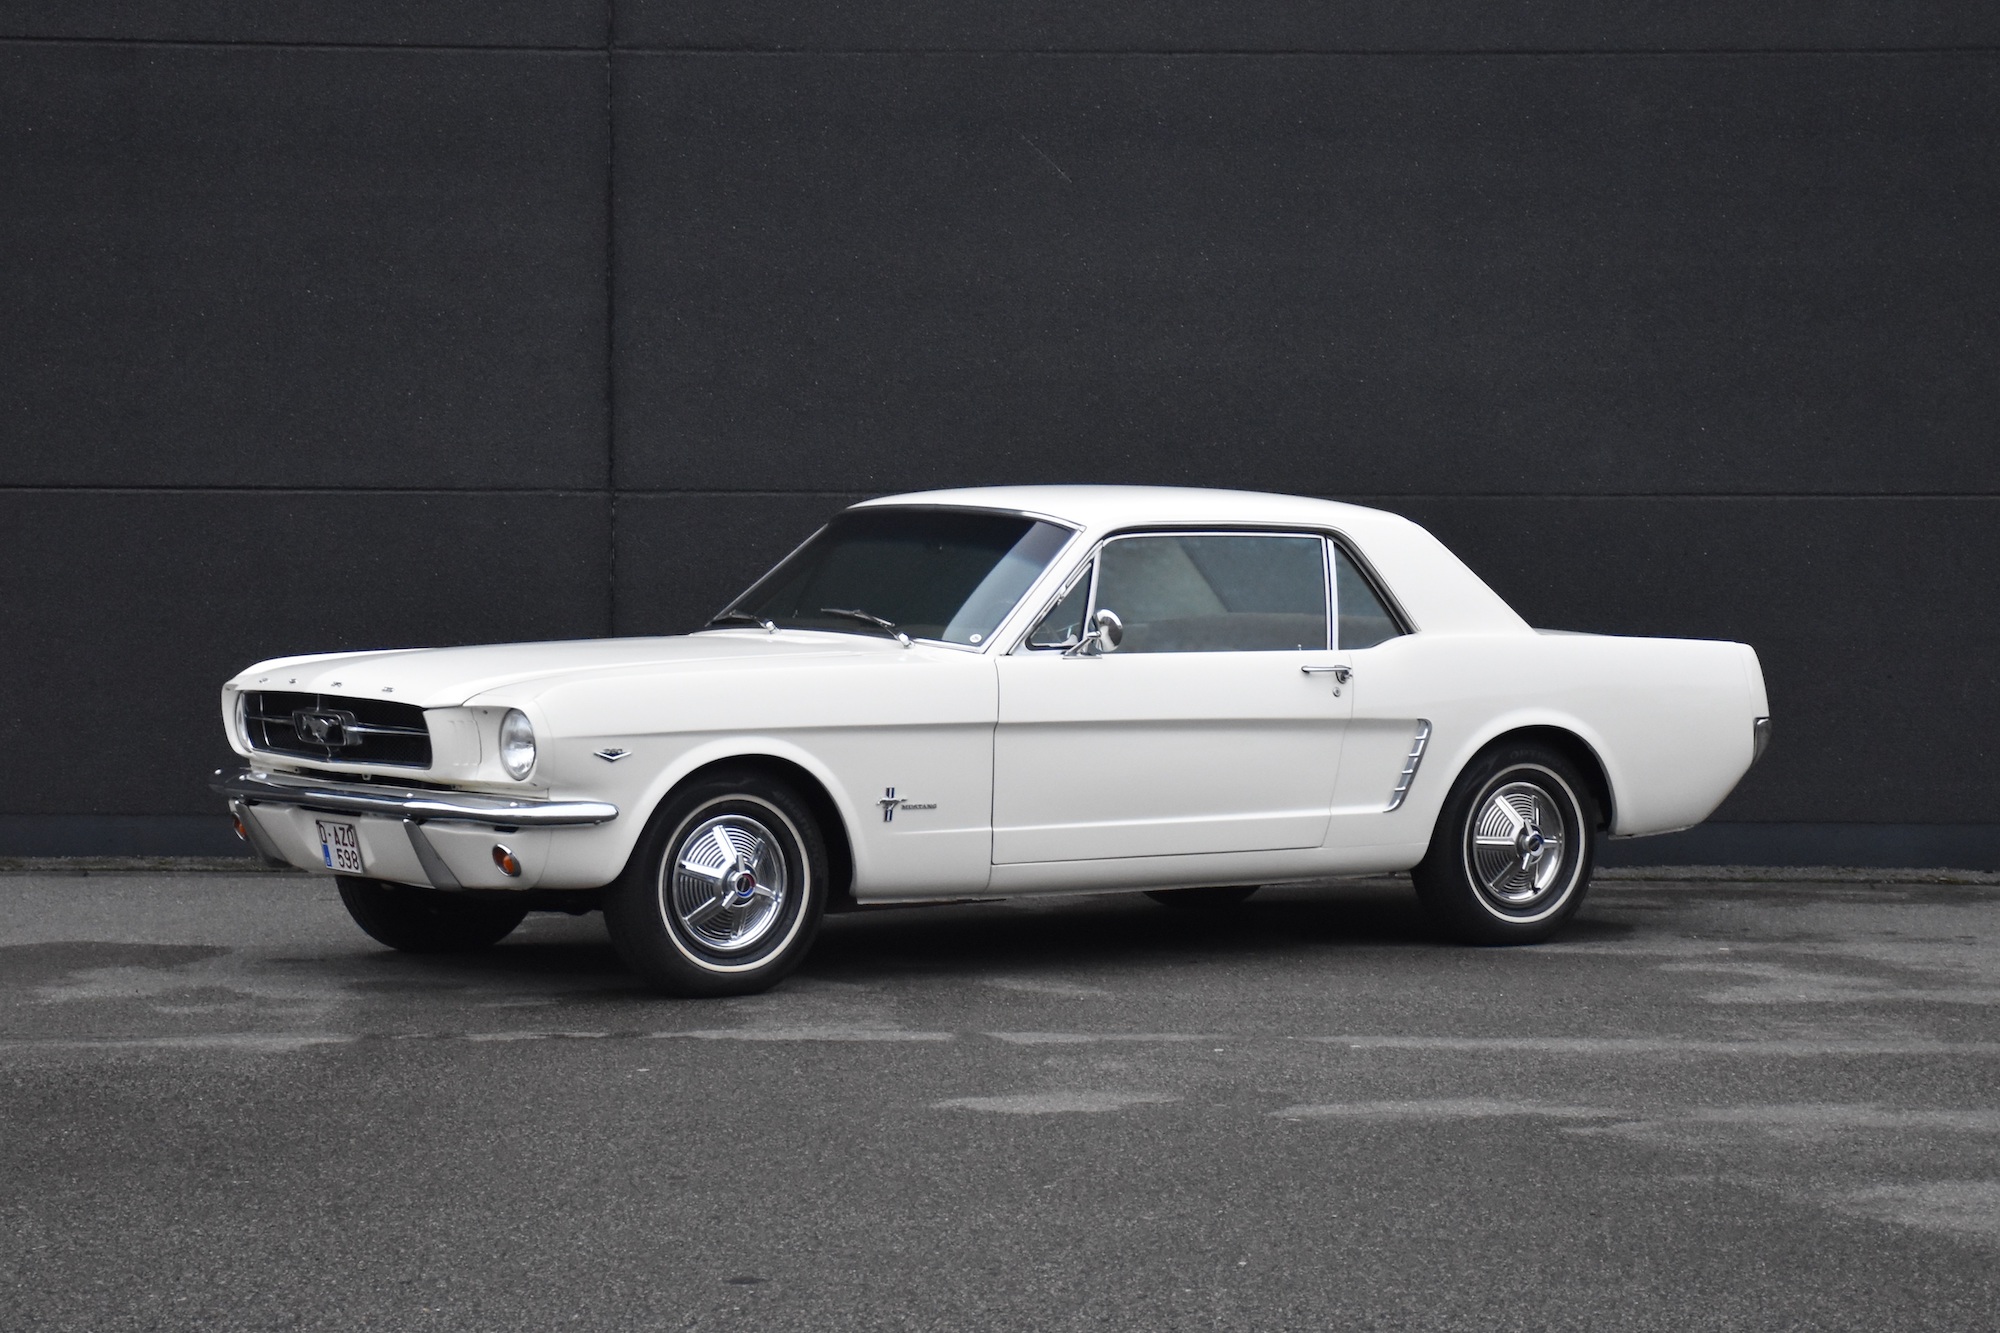 1964 FORD MUSTANG 260 HARDTOP for sale by auction in Temse, Belgium